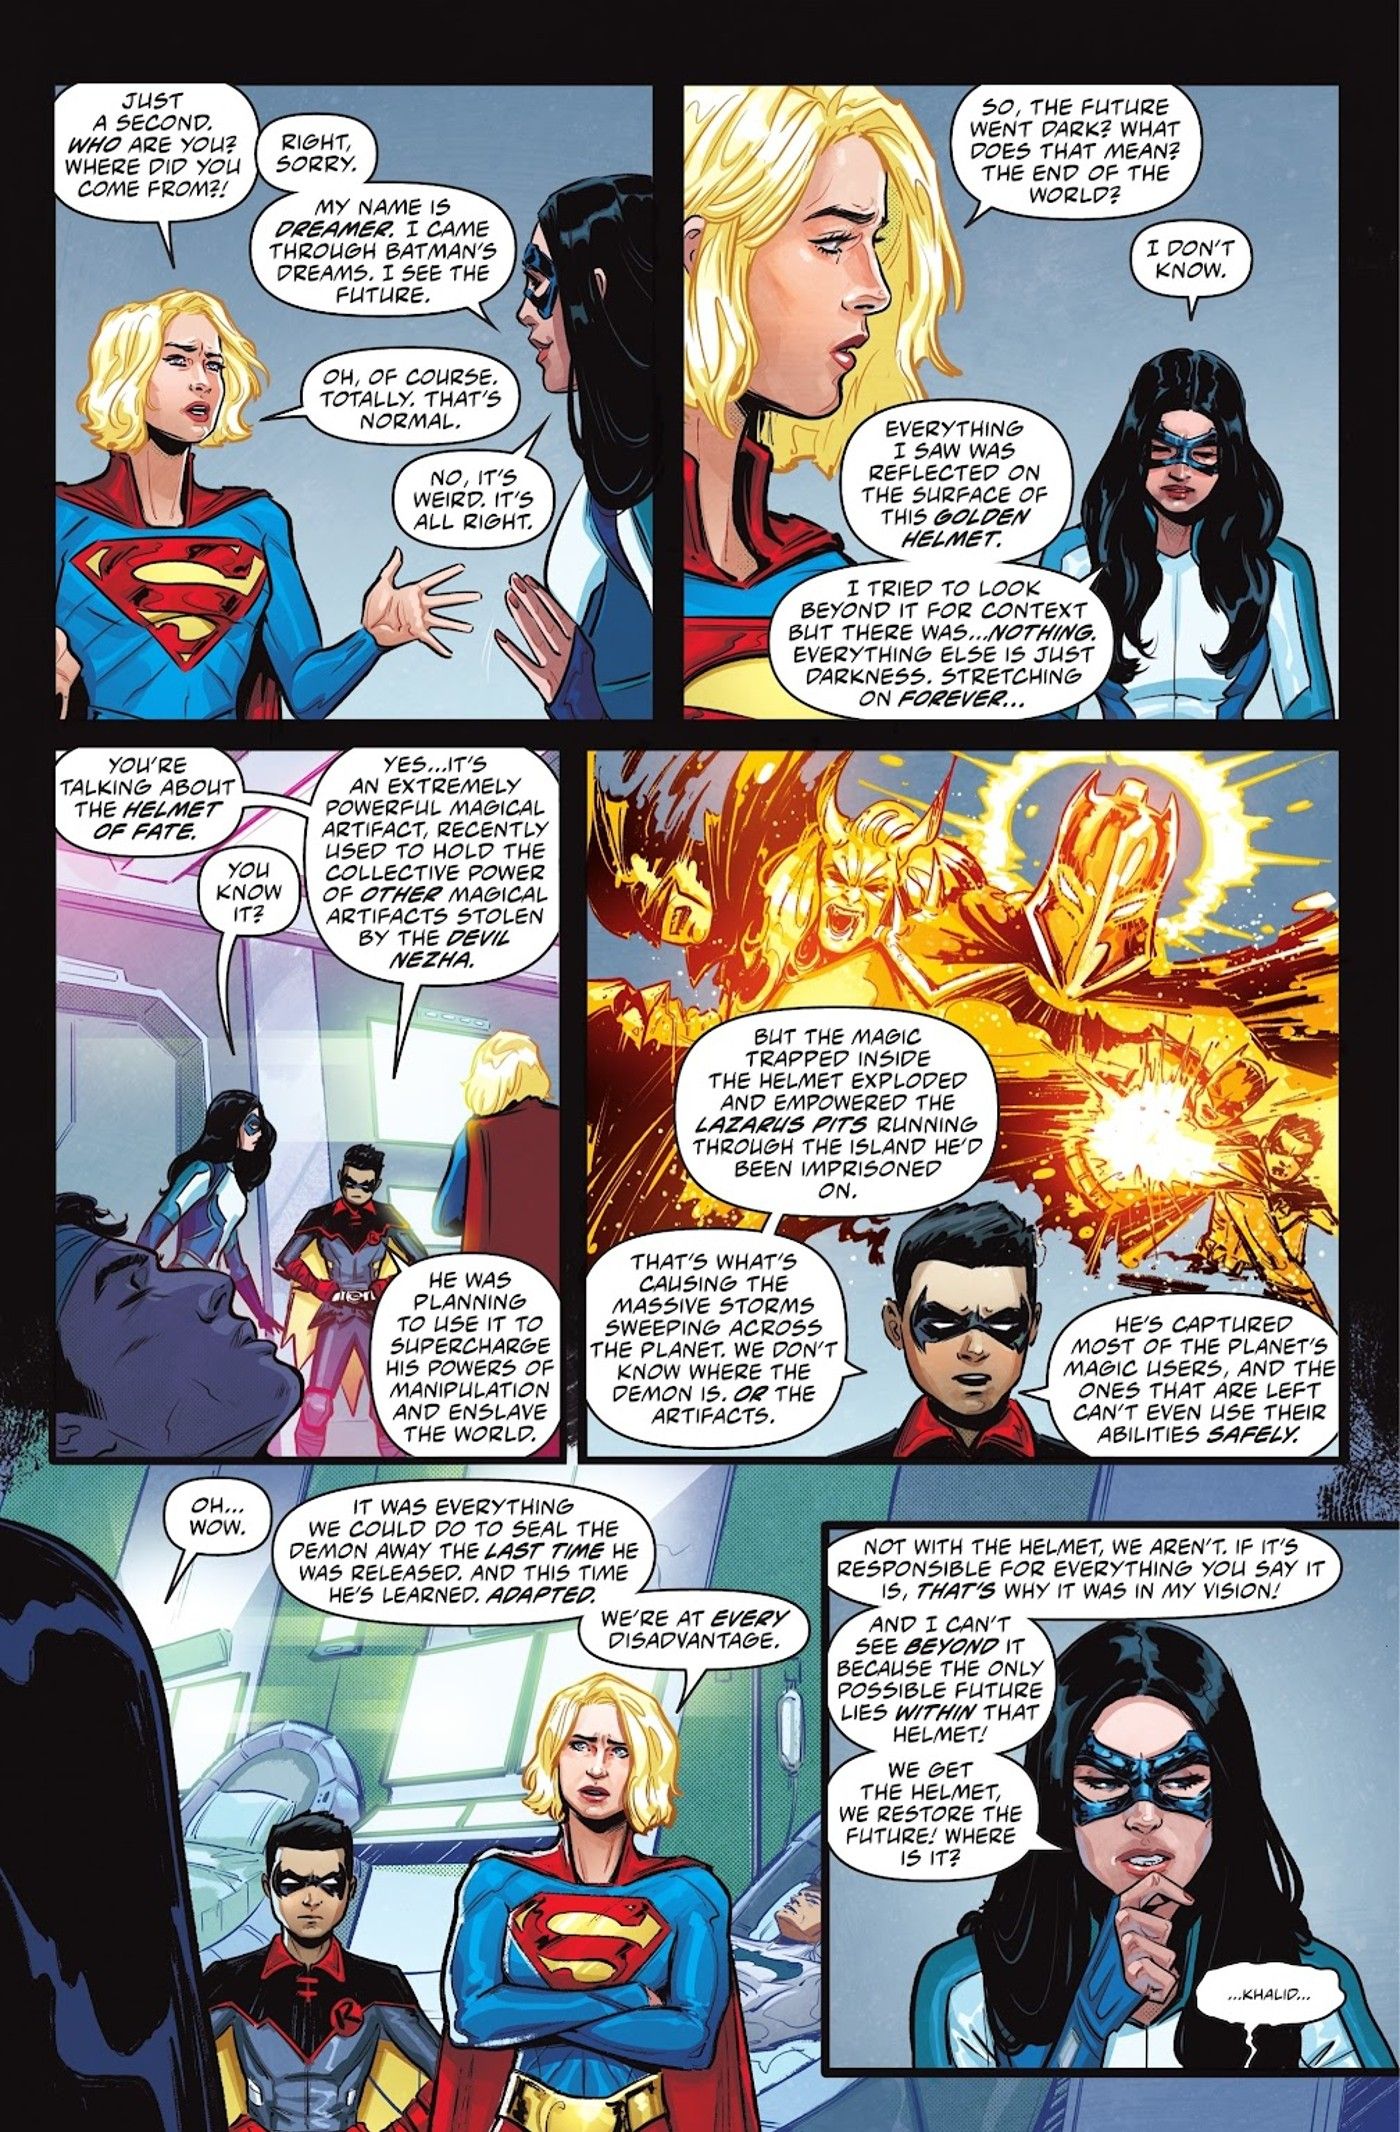 Dreamer Discusses the Helmet of Fate with Supergirl and Robin